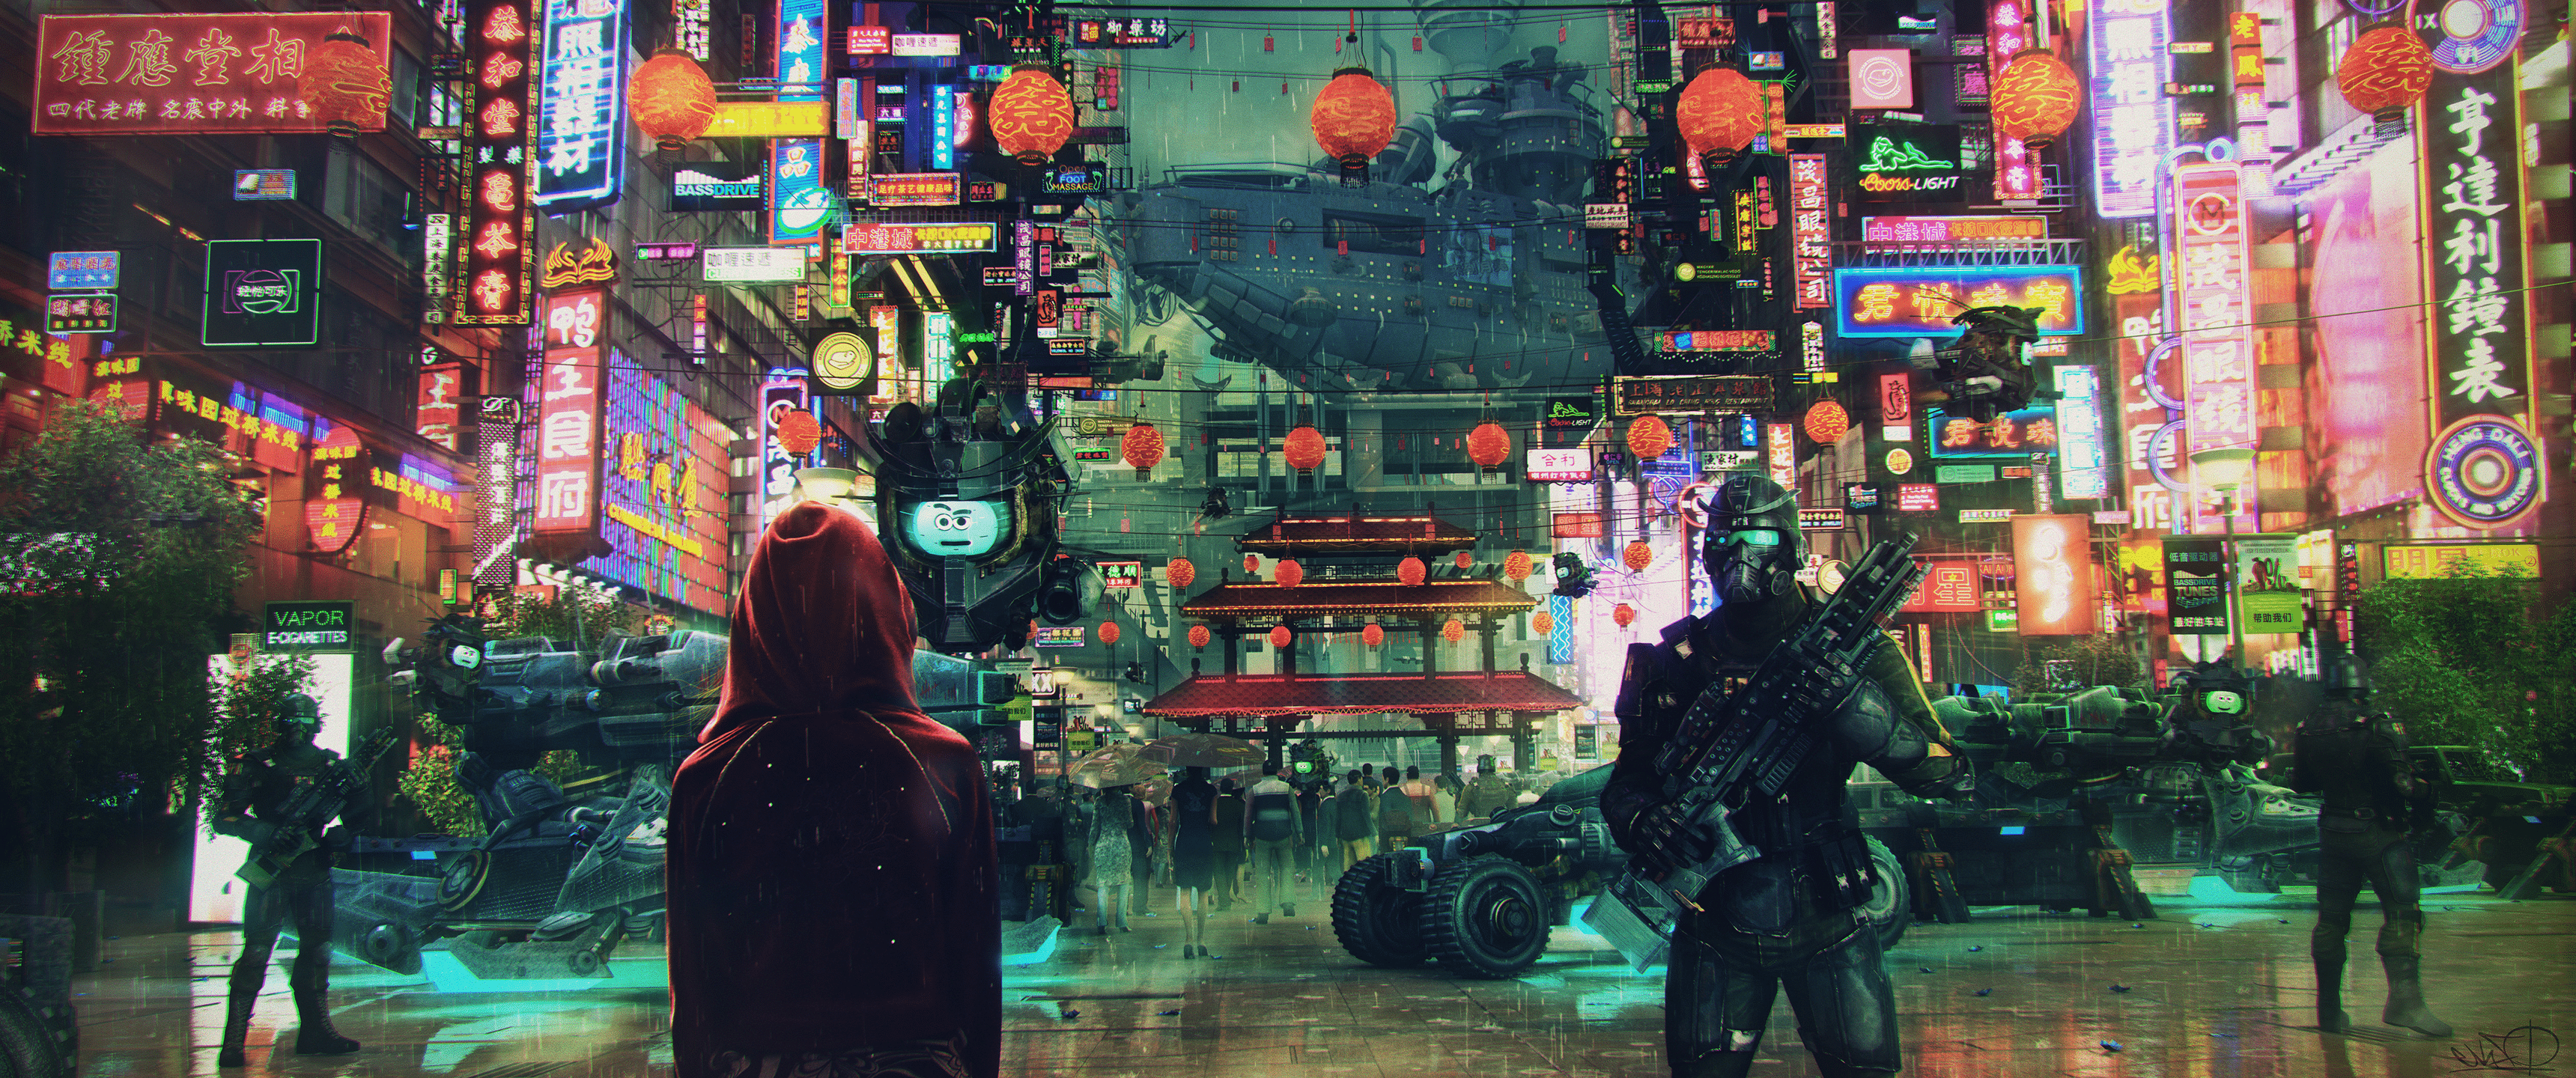 Cyberpunk 2077 wallpaper with a girl and a robot standing in a neon-lit street - 3440x1440